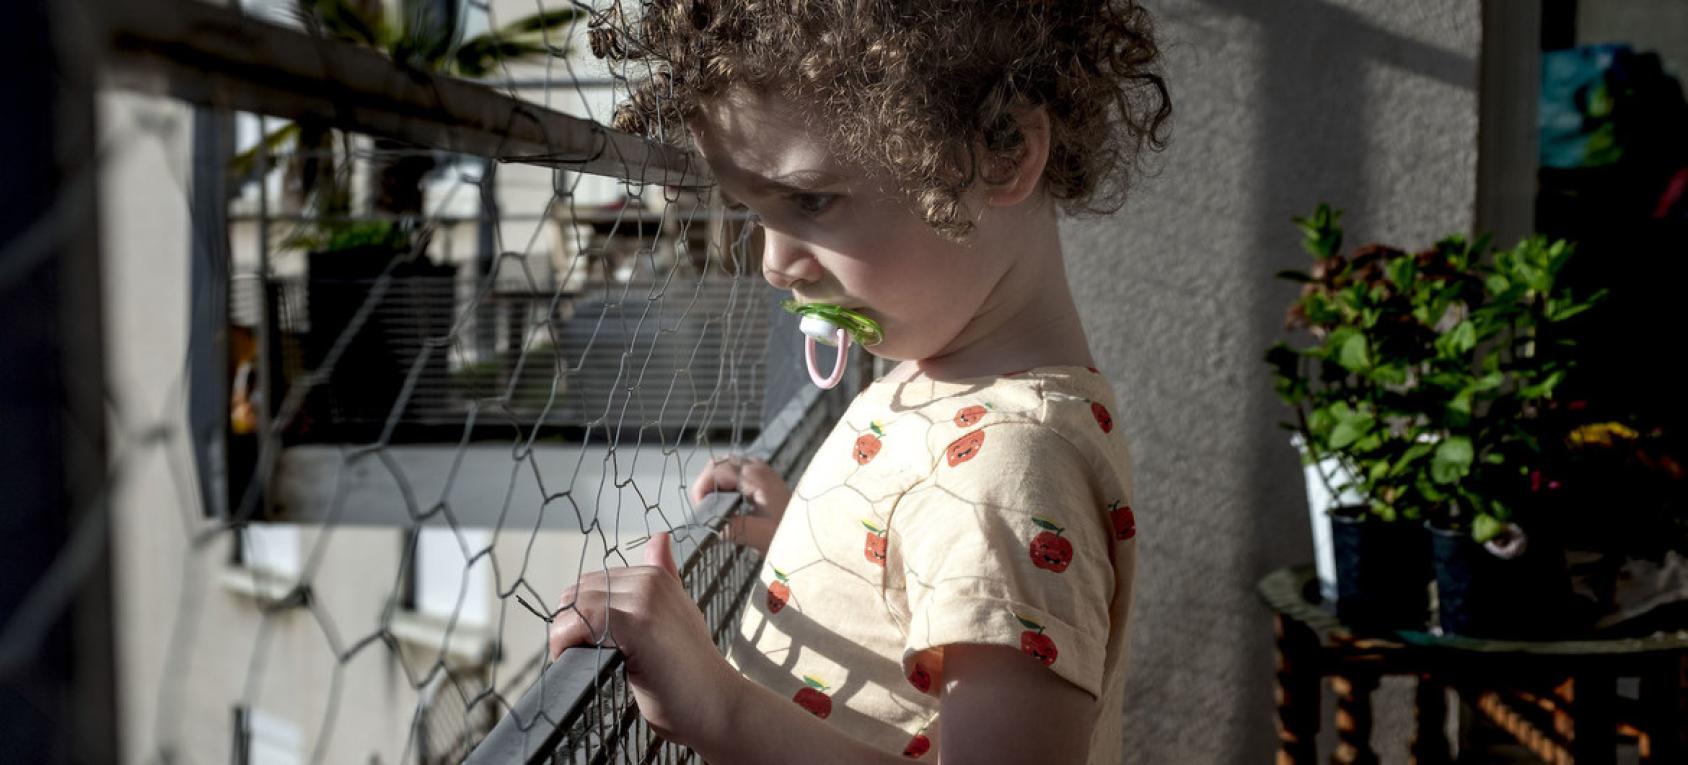 A curly haired little girl with a pacifier looks outside a gate on the porch of her apartment building.